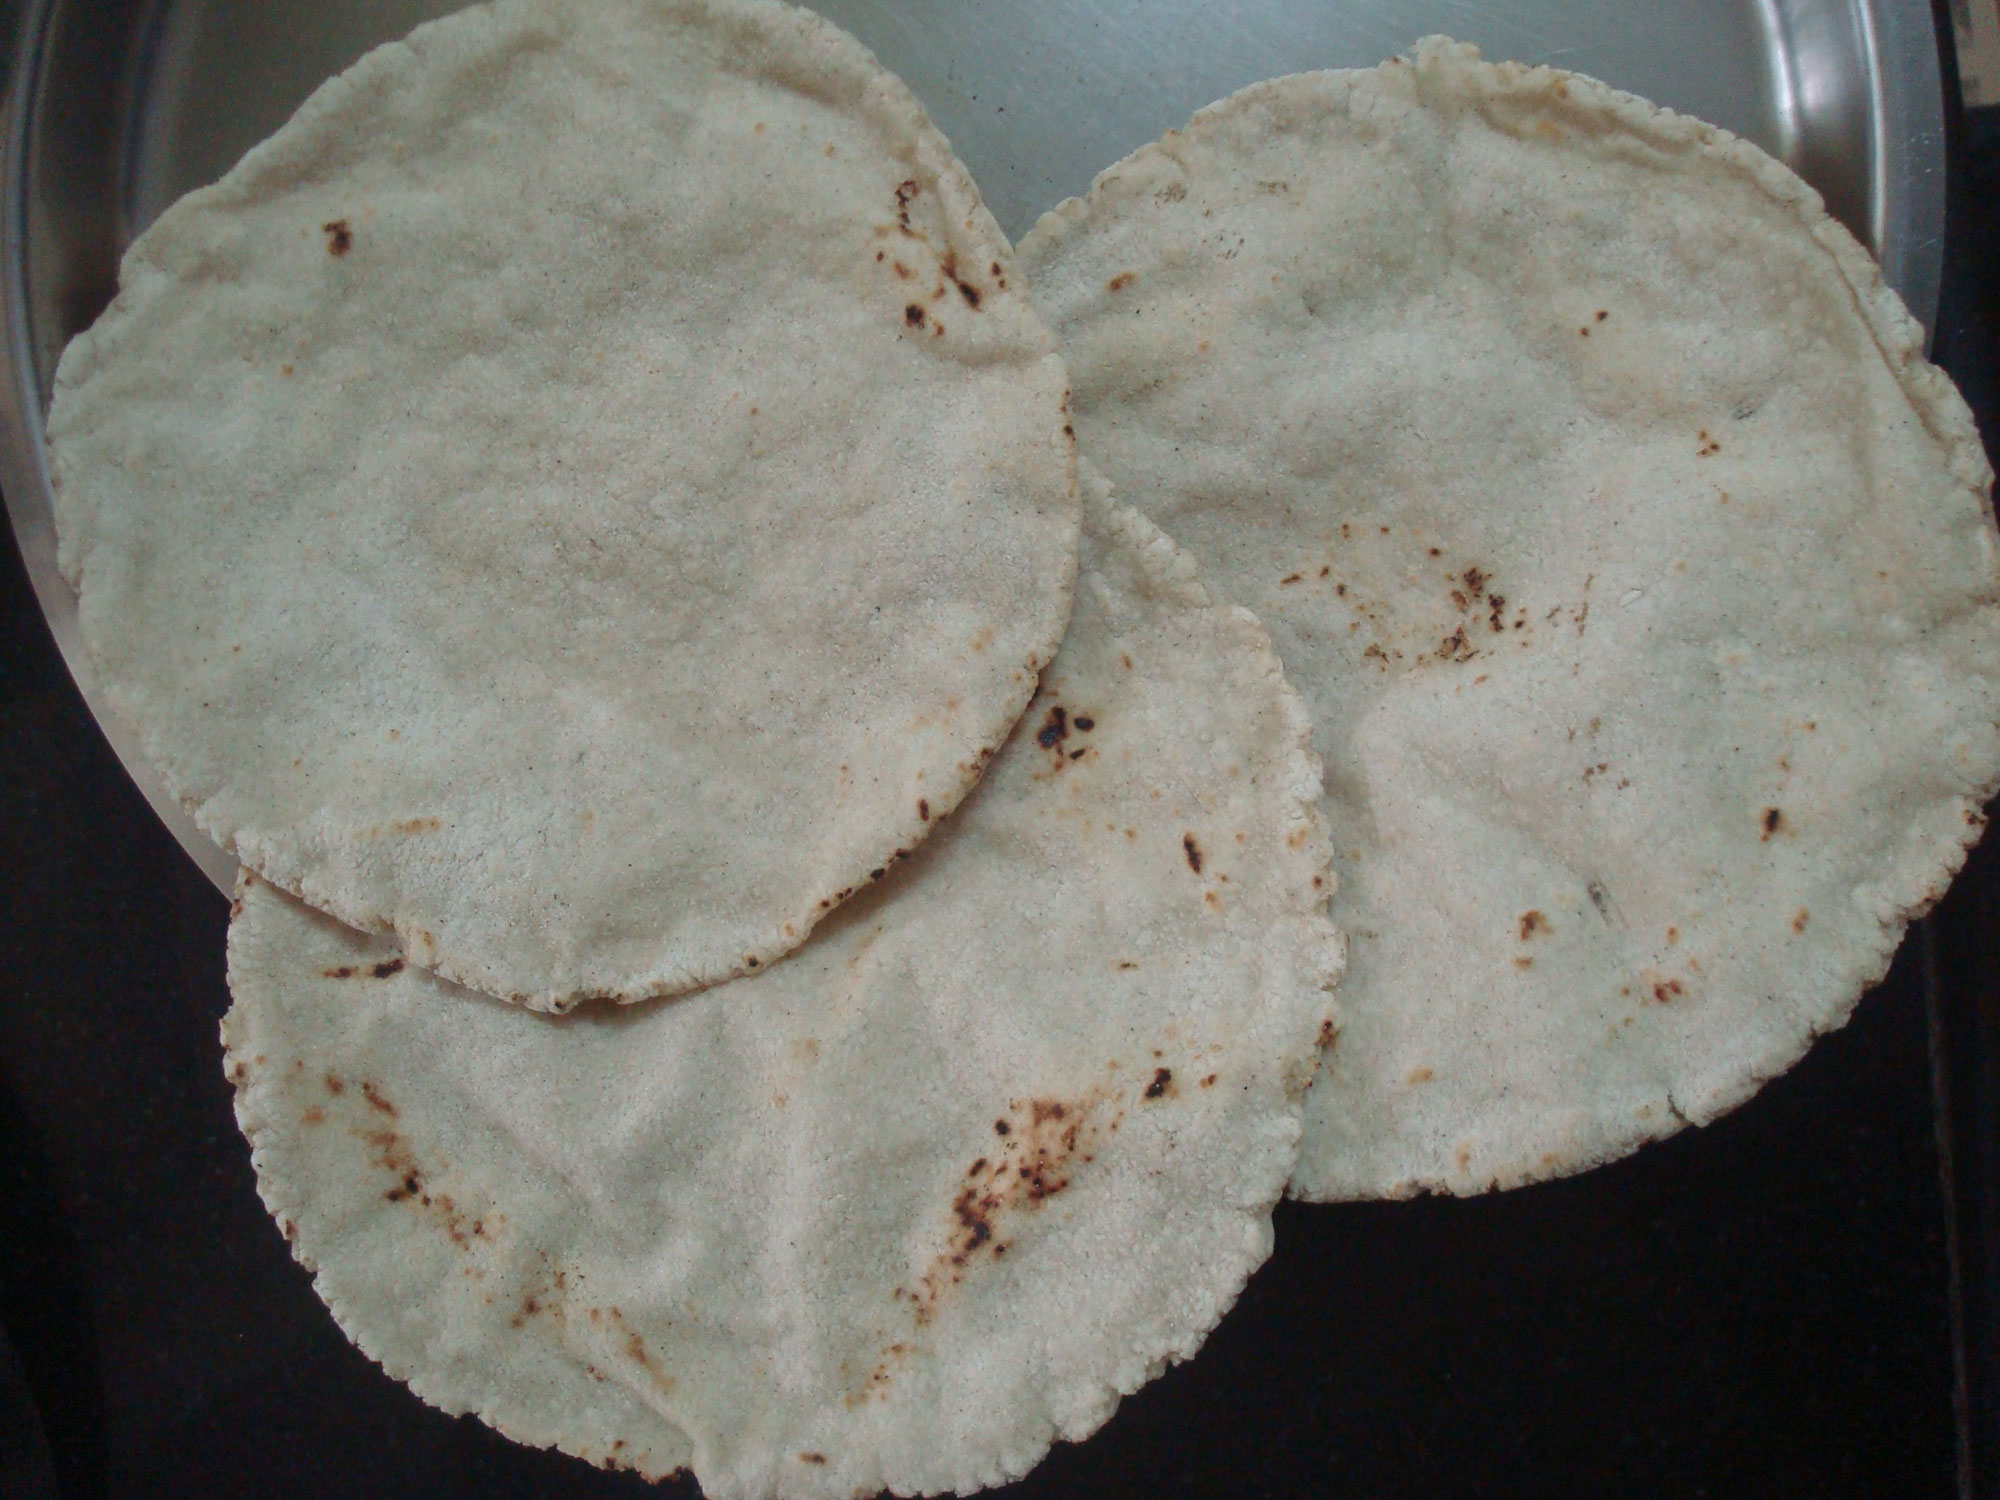 Photograph of bhakri, a type of Indian flatbread, made out of sorghum flour. The photo shows three flat, circular pieces of bread.